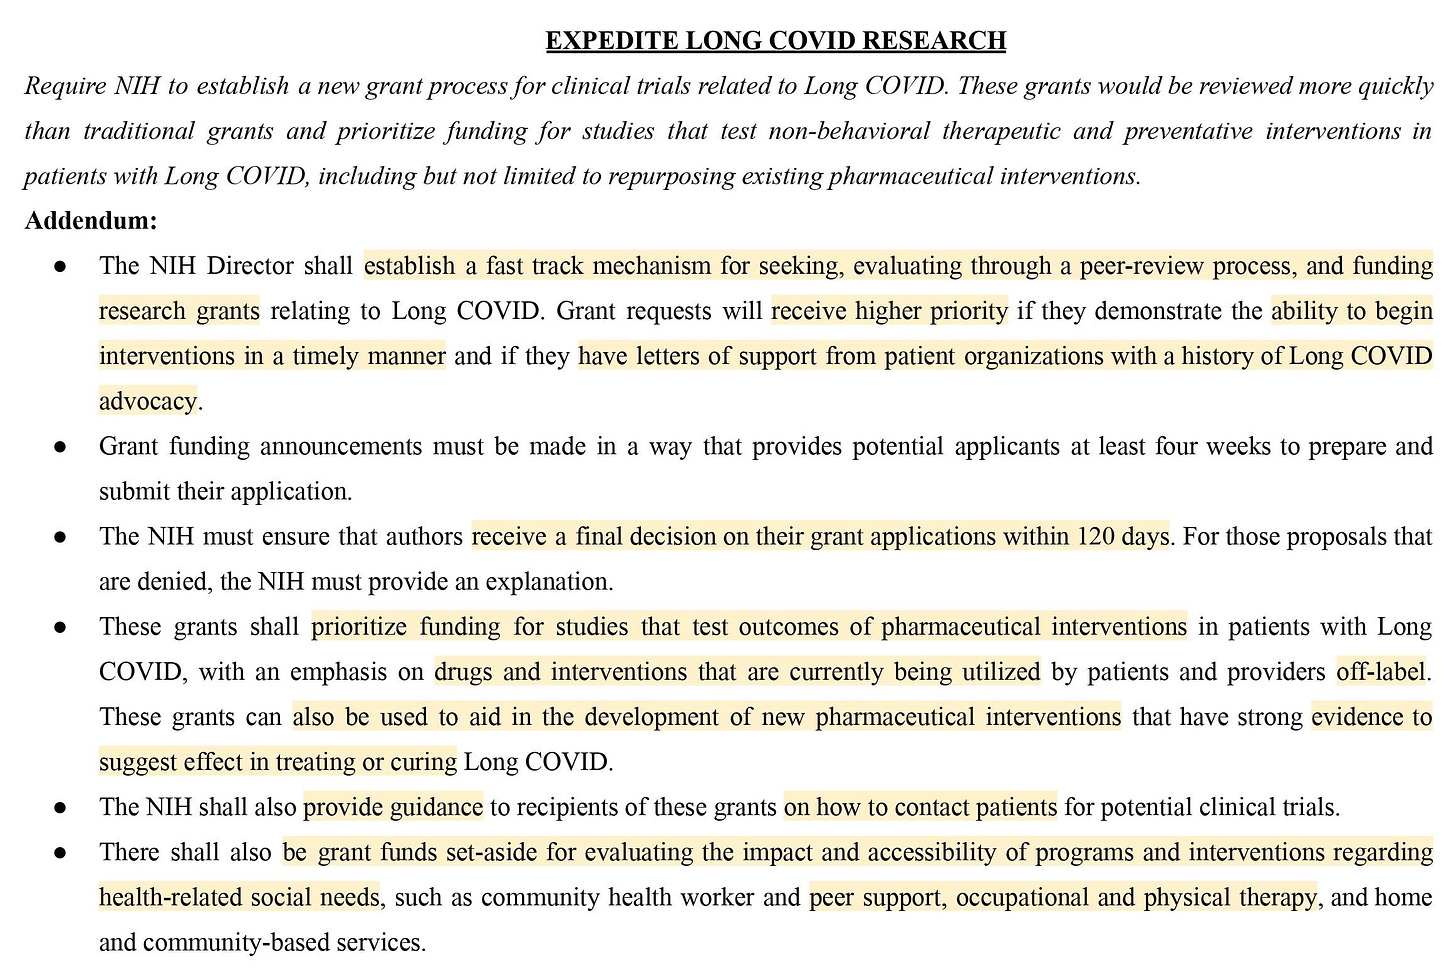 Proposal: Require NIH to establish a new grant process for clinical trials related to Long COVID. These grants would be reviewed more quickly than traditional grants and prioritize funding for studies that test non-behavioral therapeutic and preventative interventions in patients with Long COVID, including but not limited to repurposing existing pharmaceutical interventions.  Addendum:  ● Establish a fast track mechanism for seeking, evaluating through a peer-review process, and funding research grants relating to Long COVID.  ● Grant requests will receive higher priority if they demonstrate the ability to begin interventions in a timely manner. ● These grants shall prioritize funding for studies that test outcomes of off-label pharmaceutical interventions and new developments. 